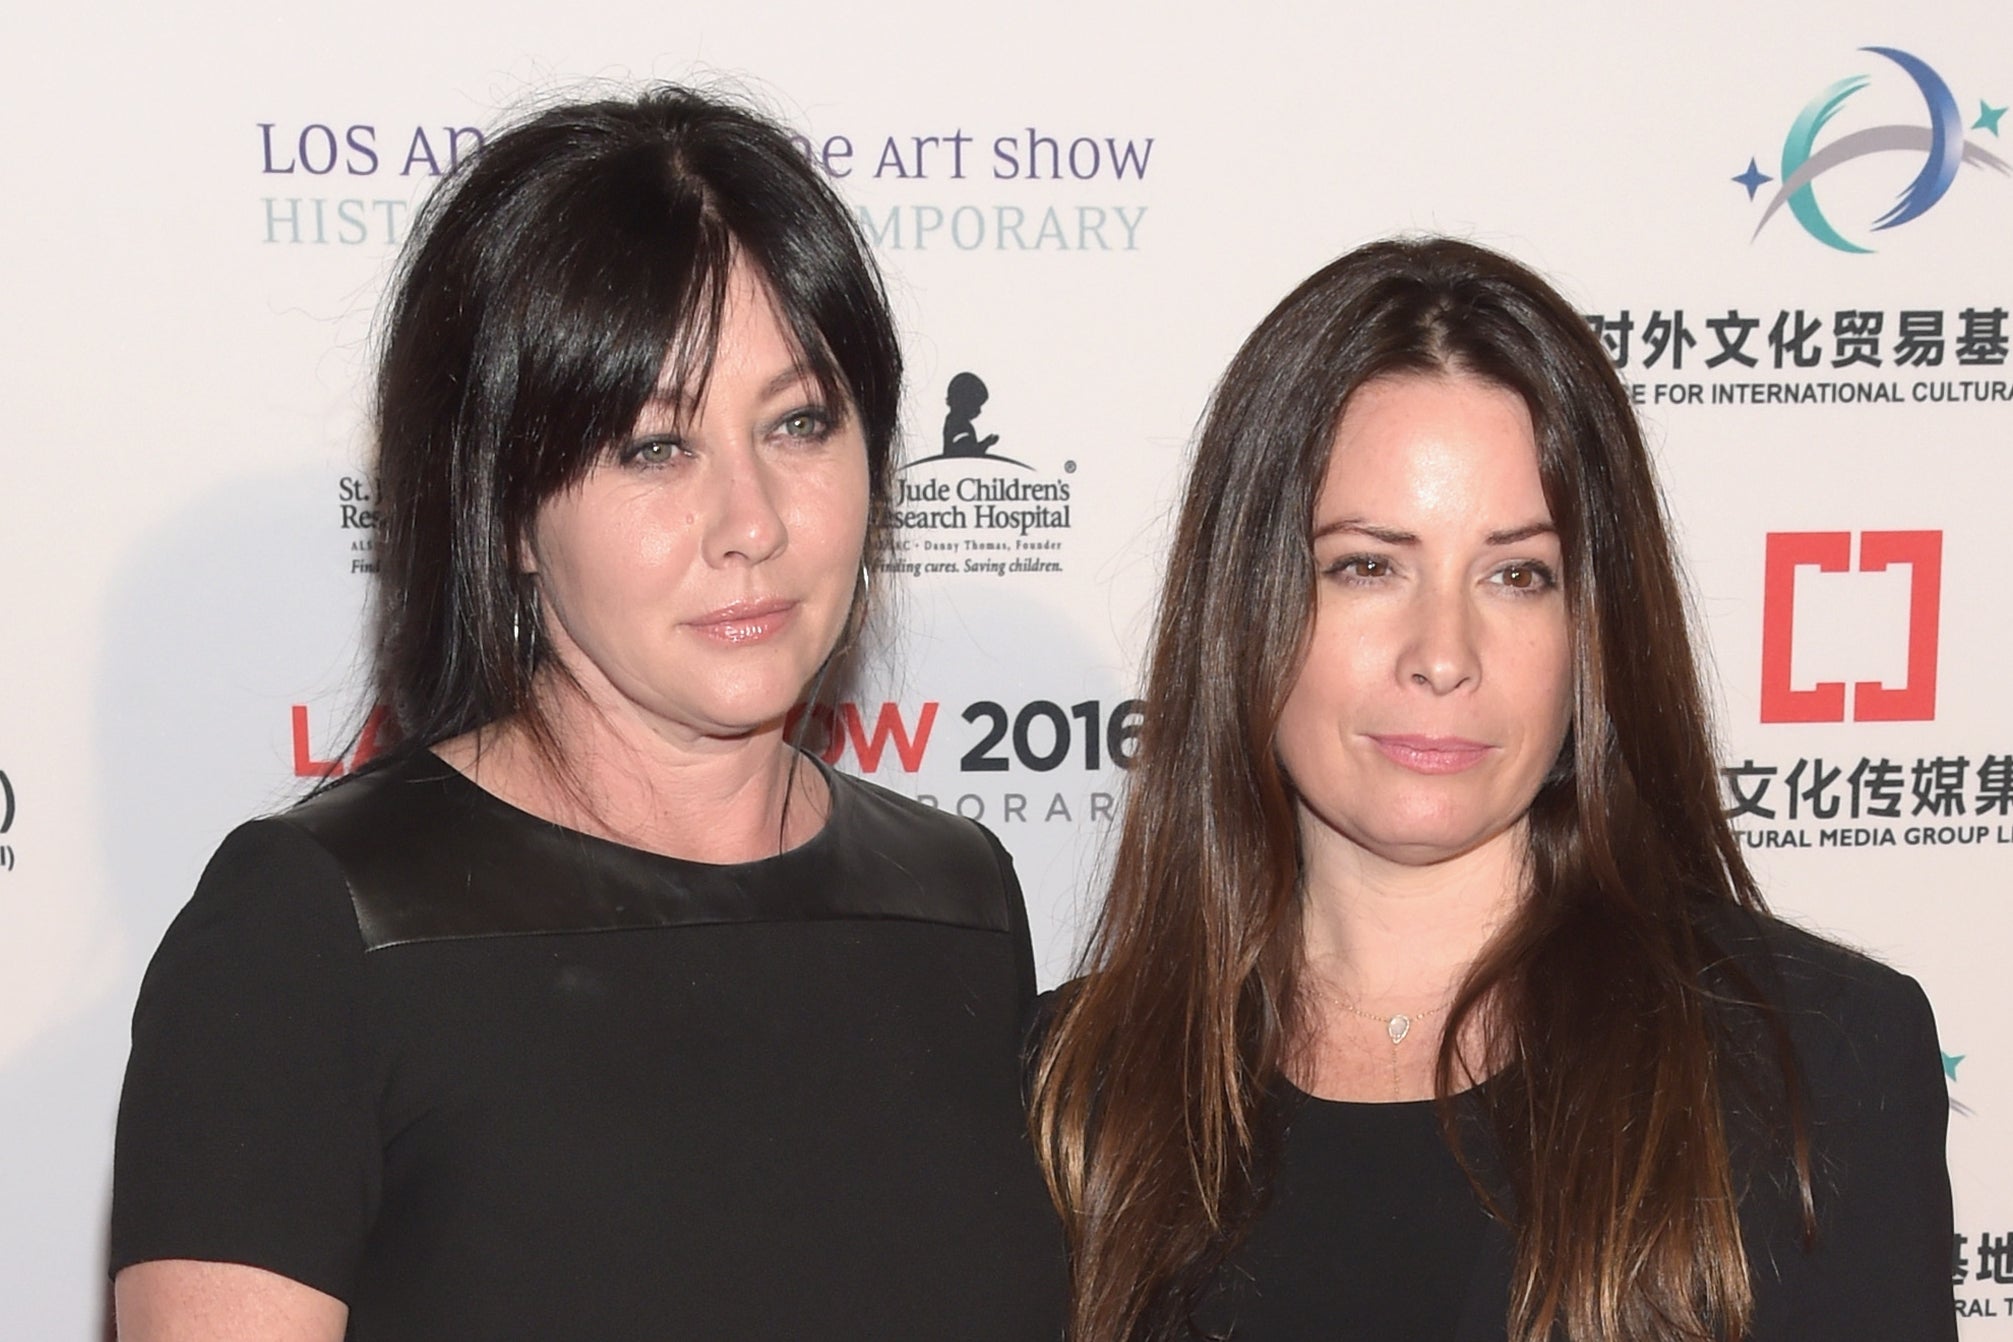 Shannen Doherty and Holly Marie Combs, pictured in 2016, have remained close friends since starring in Charmed together